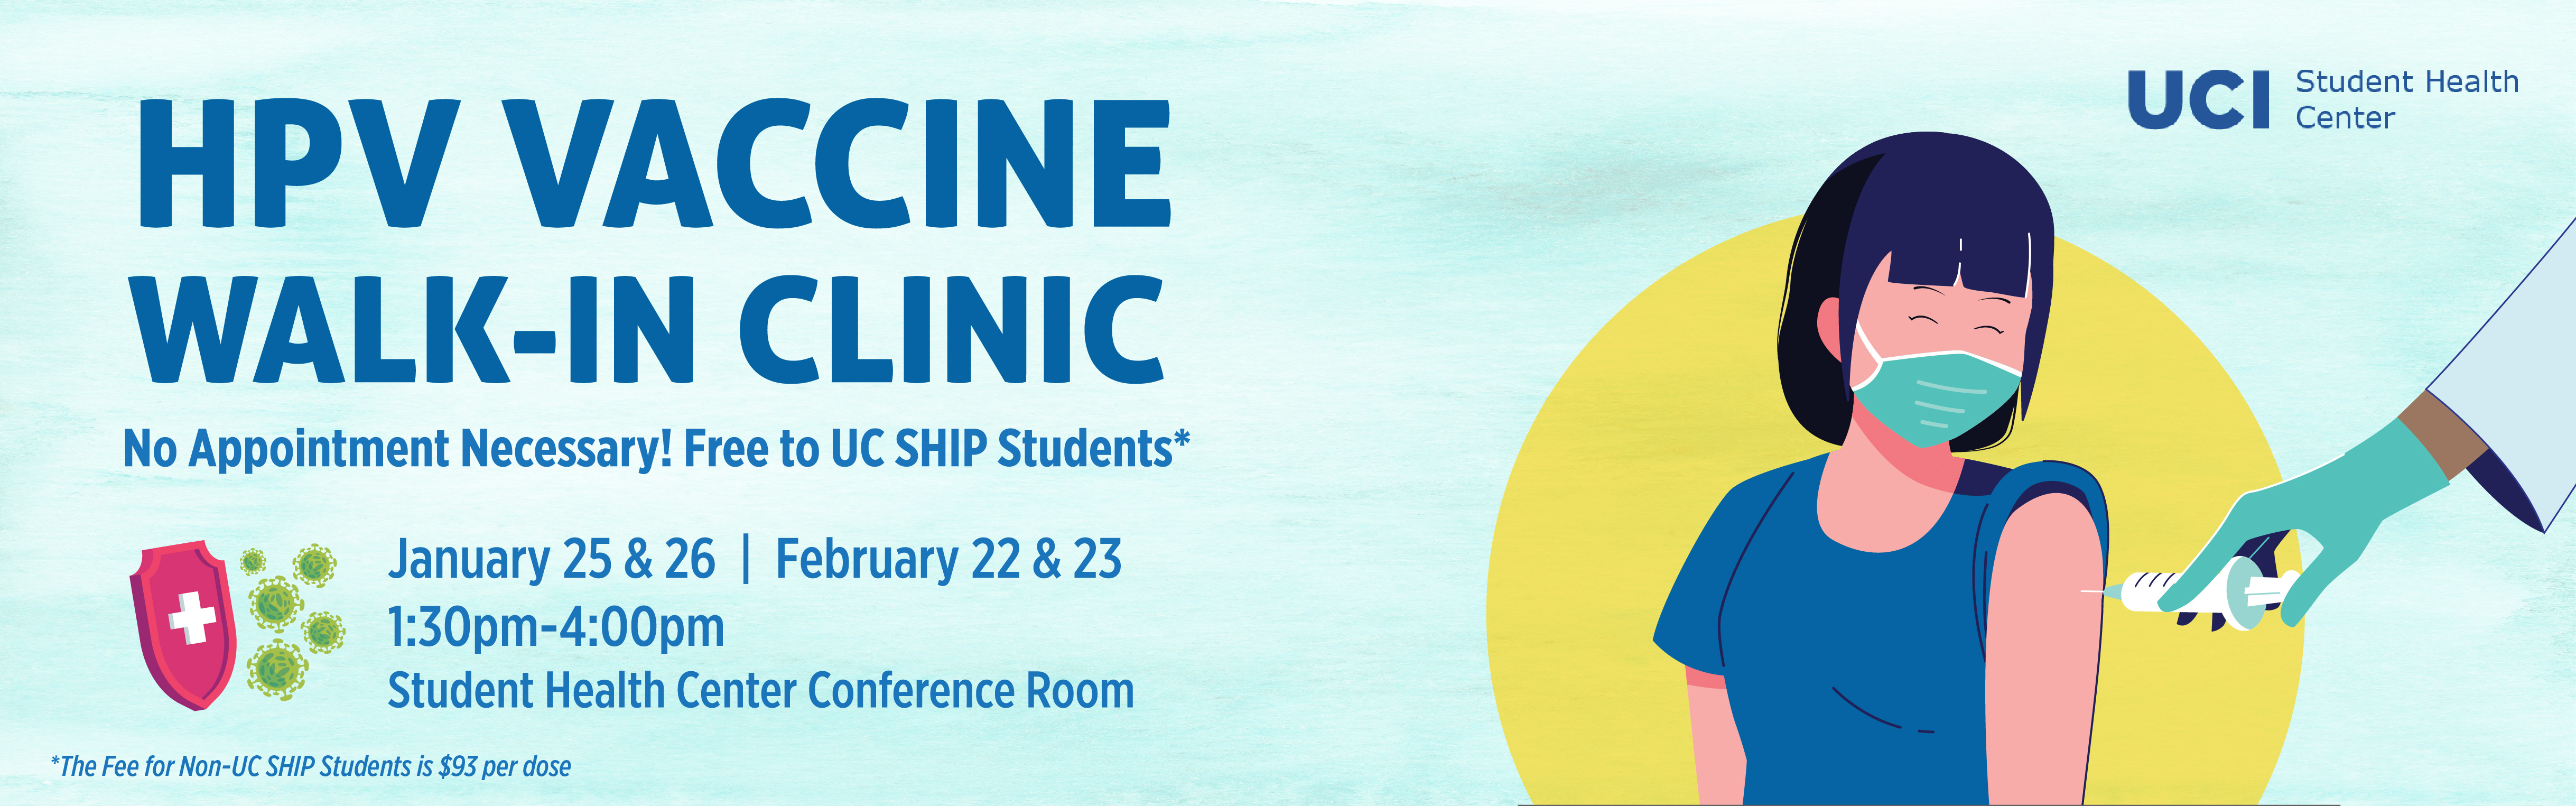 HPV Vaccine Walk -In Clinic No Appointments Necessary. Free to UCSHIP Students. January 25, 26 and February 22 and 23 2023. 1:30pm- 4:00pm